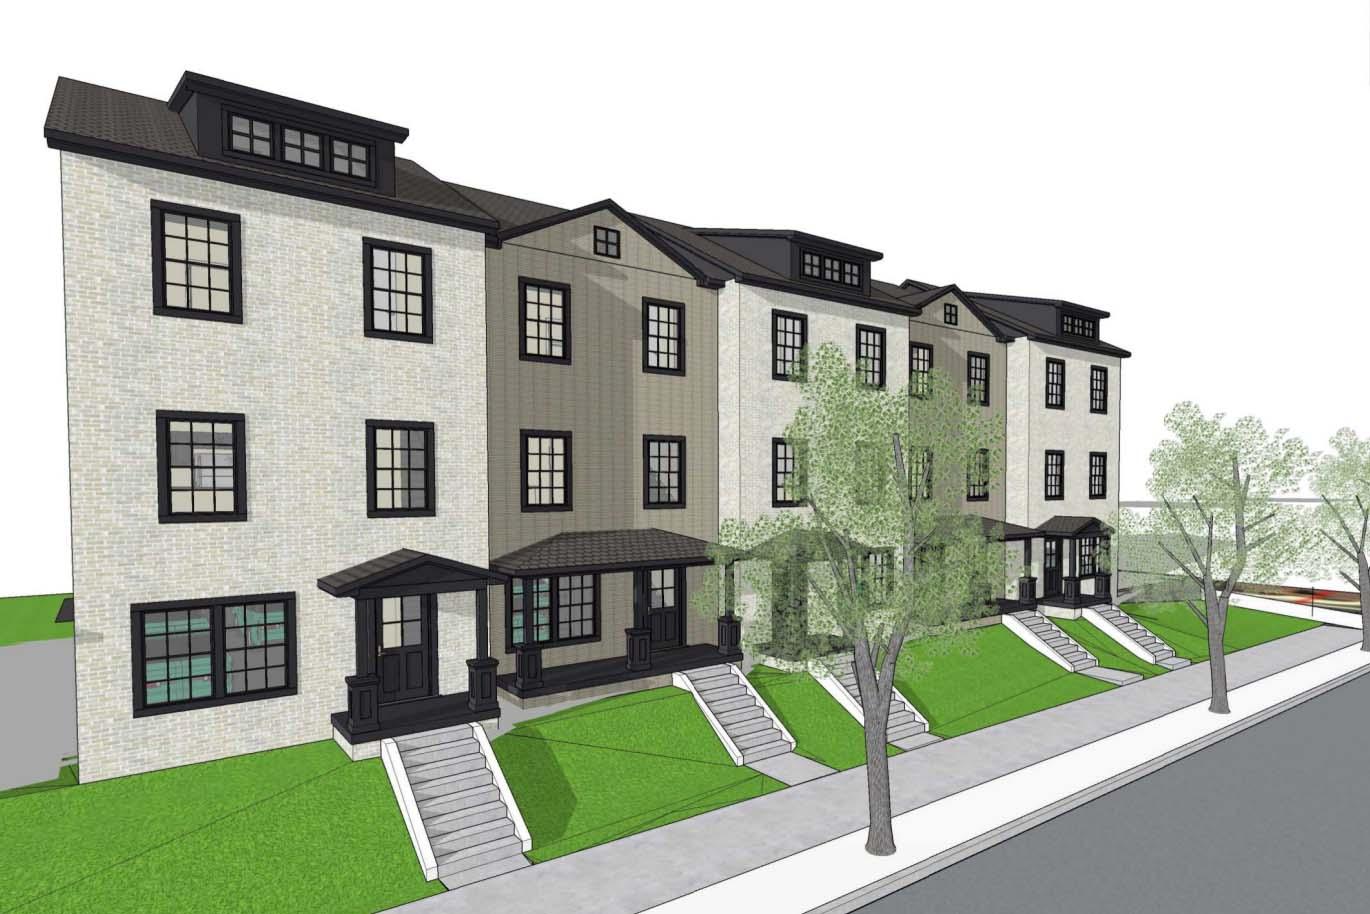 Hillside Drive proposed townhomes